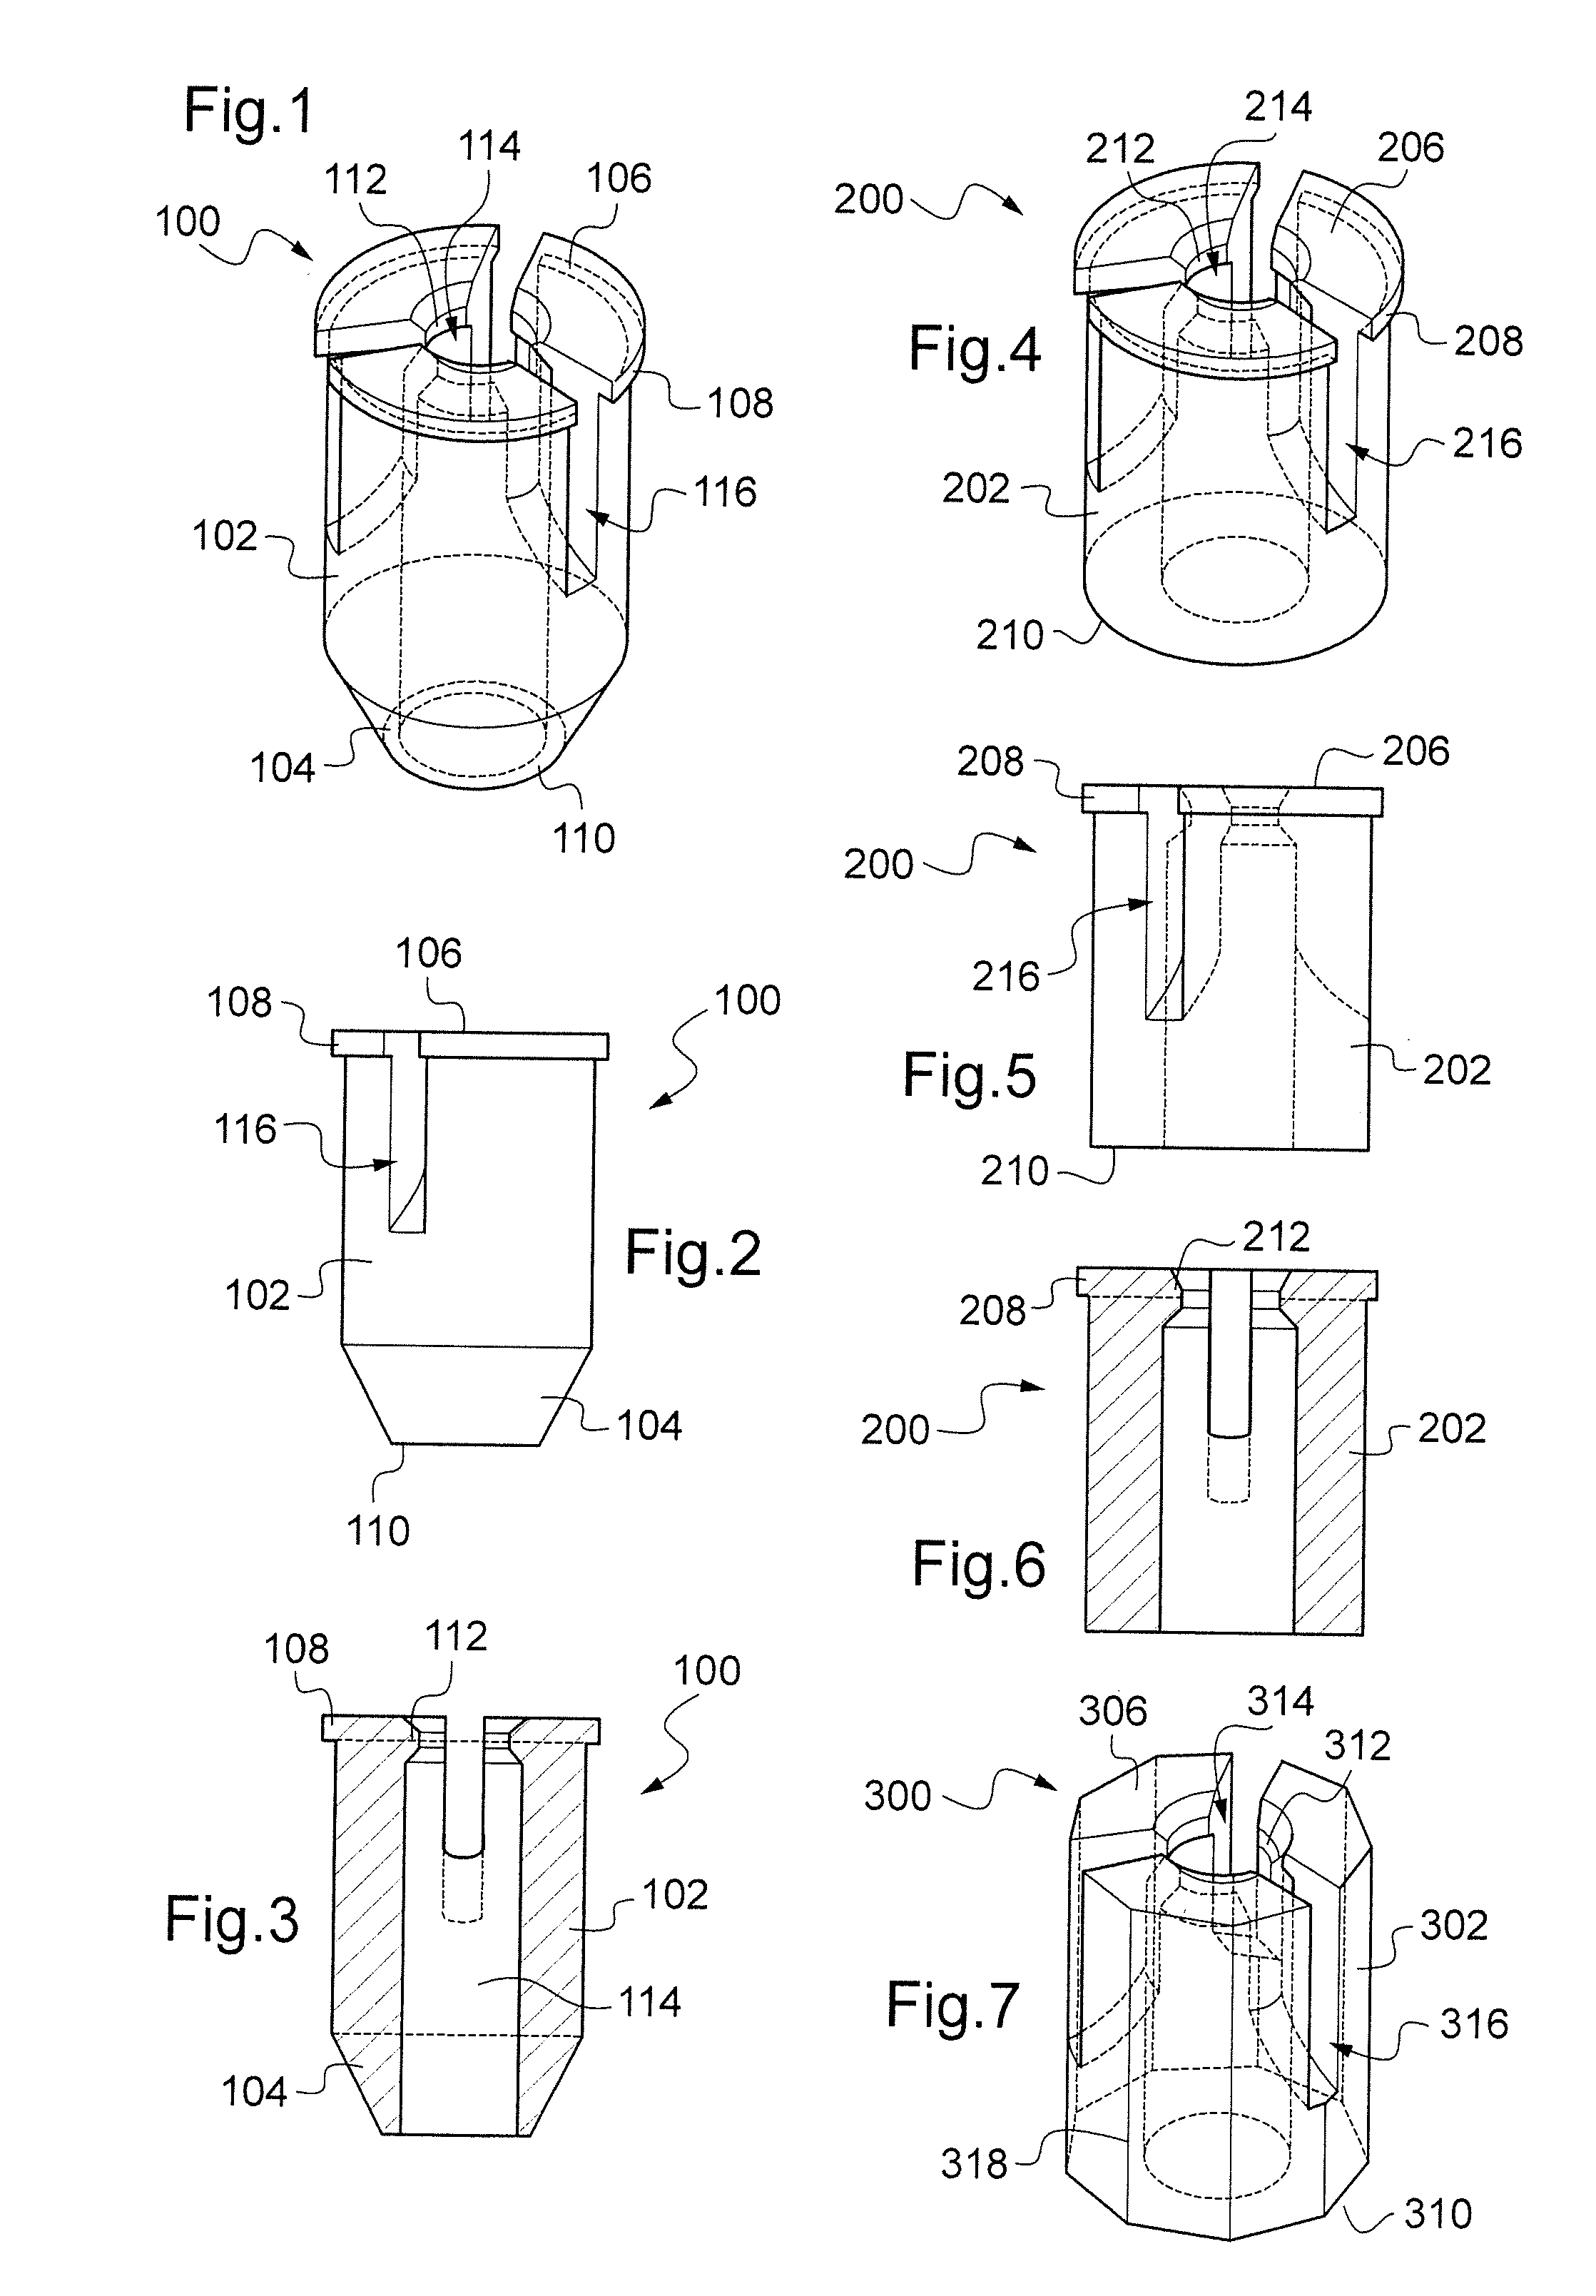 Drill assistance kit for implant hole in a bone structure